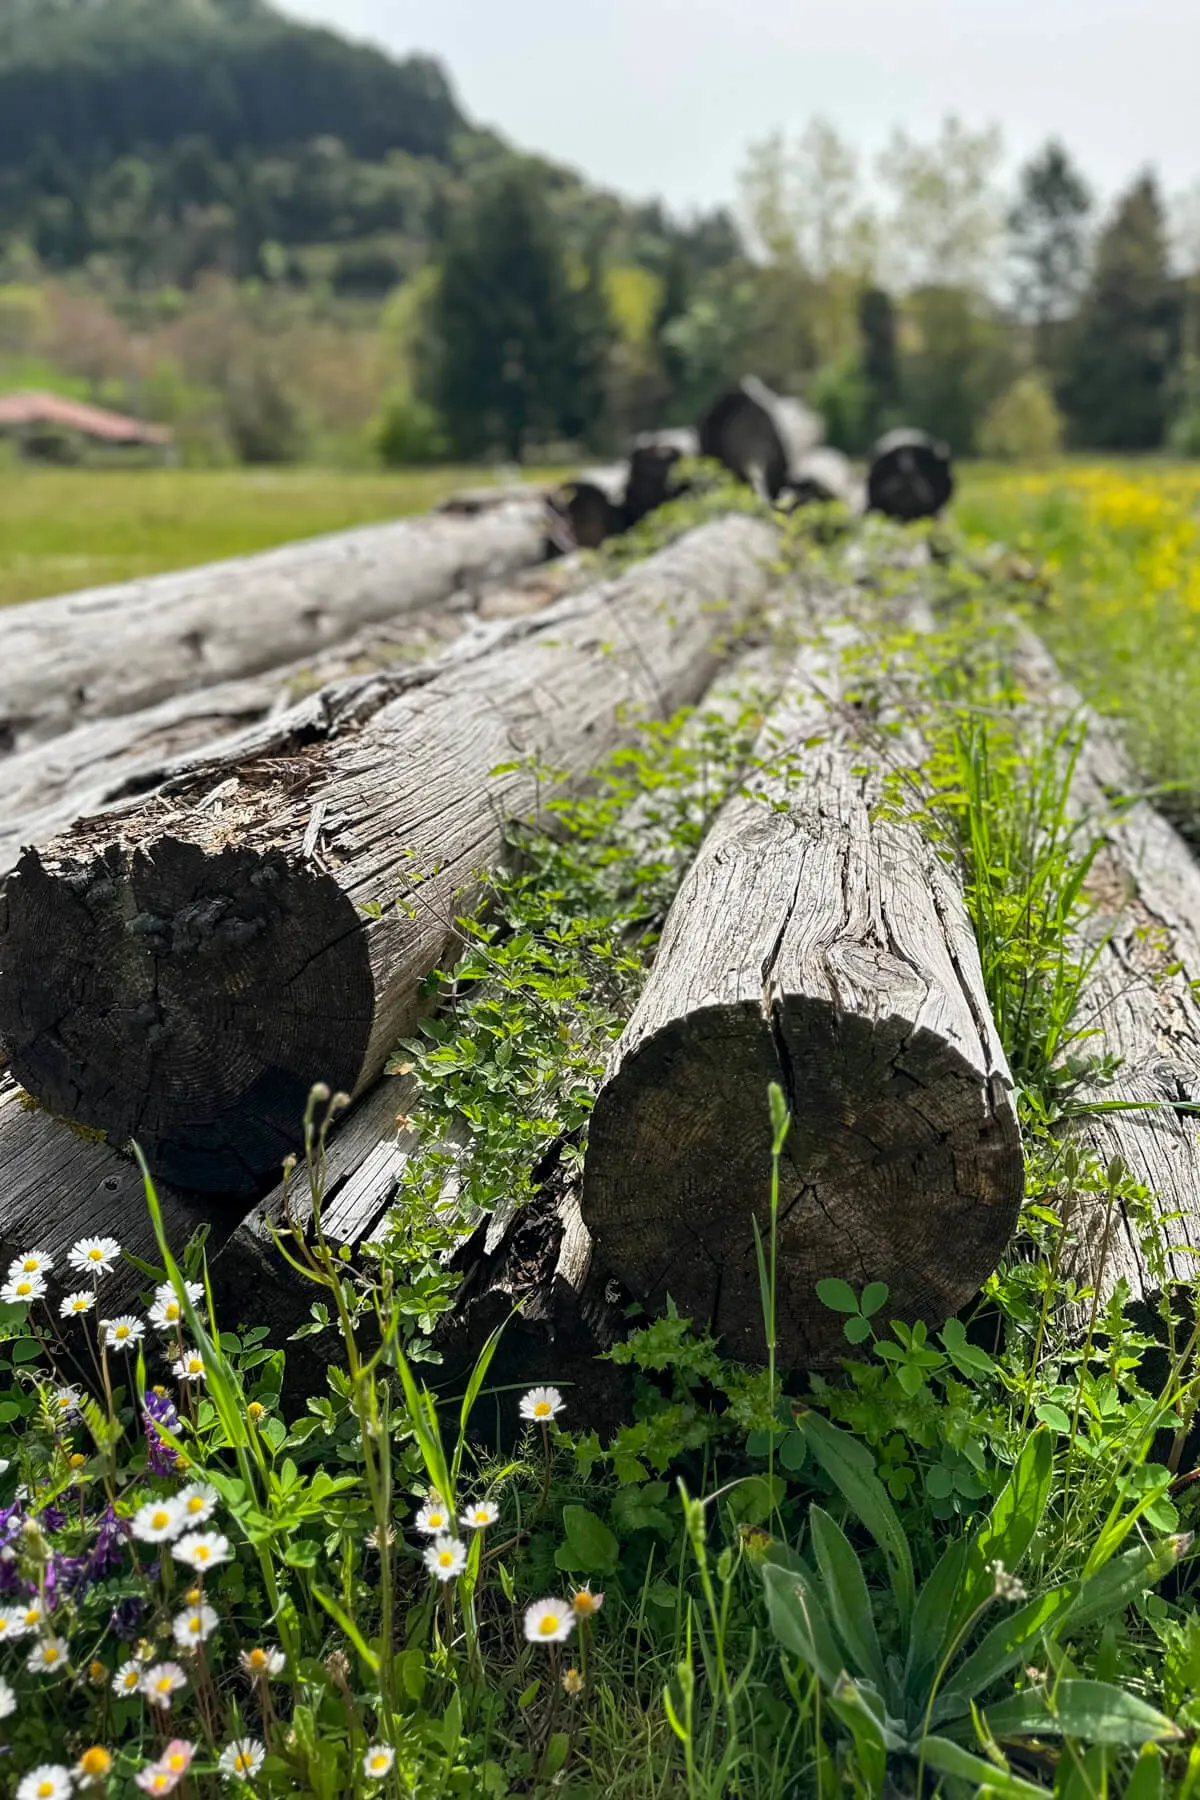 Logs in the yard of the forest museum with small flowers growing in front